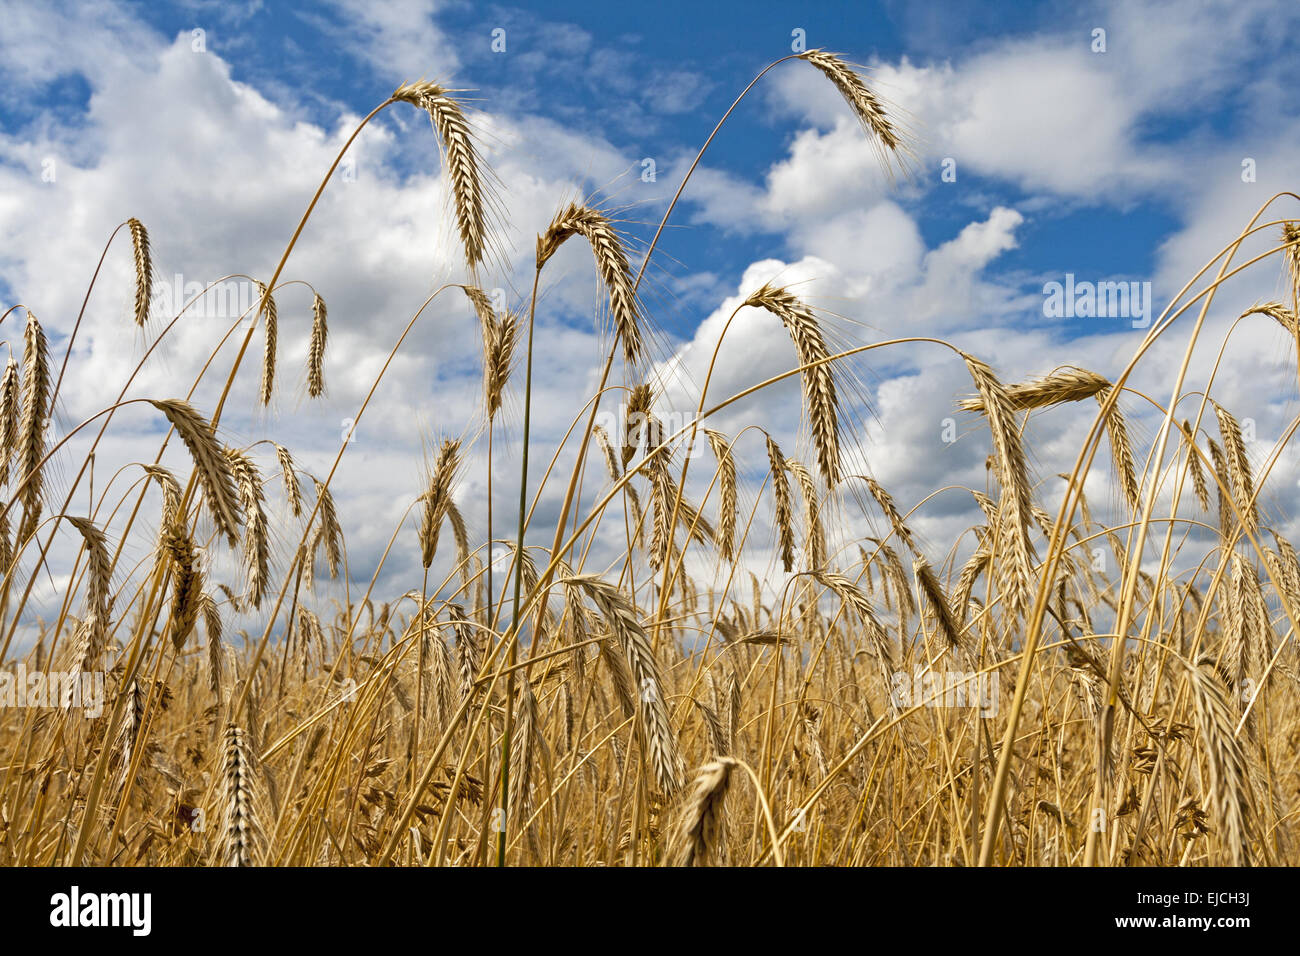 Cornfield in front of clouded sky Stock Photo